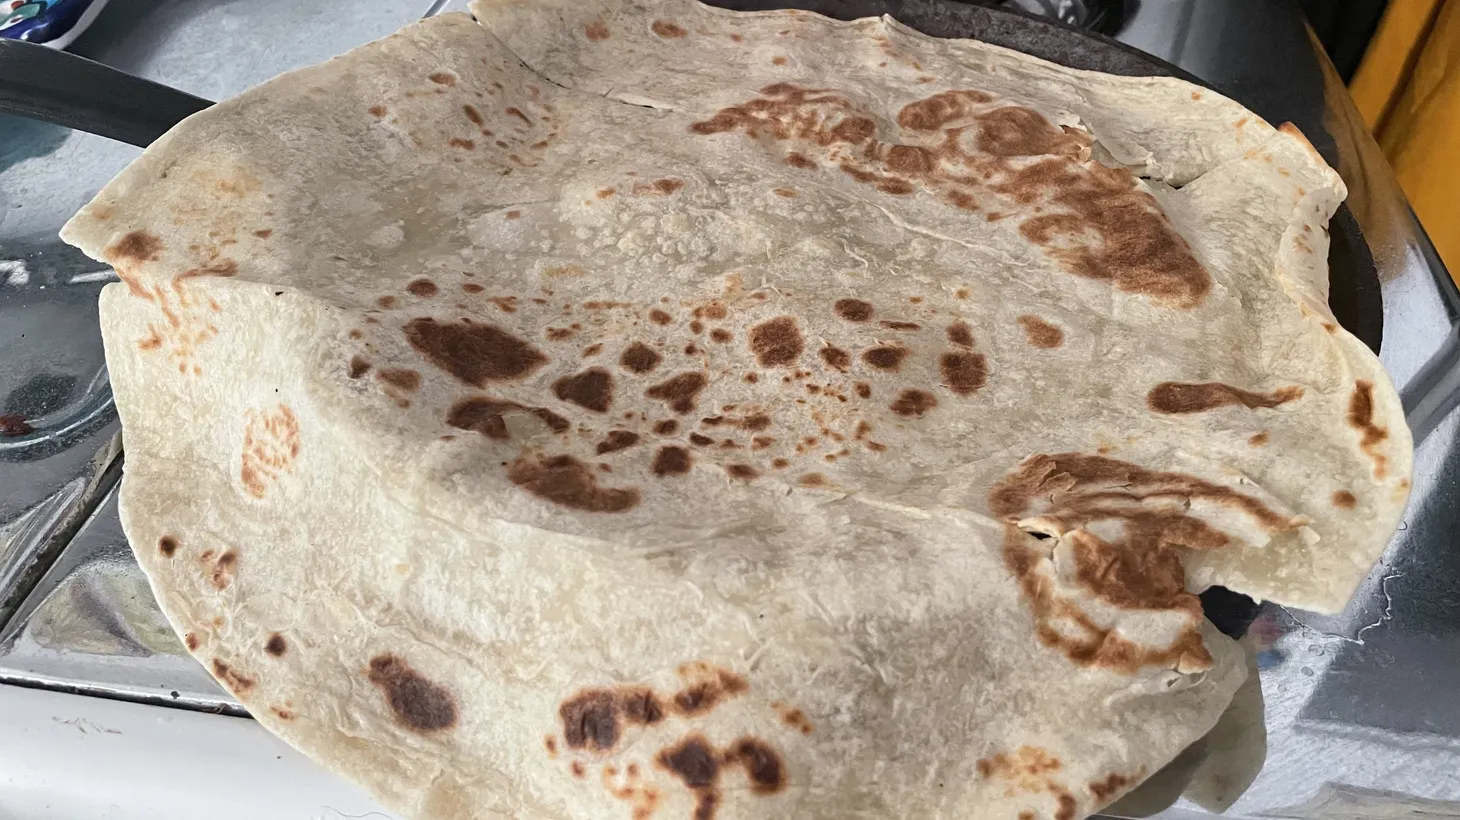 “El Burrito House has oversized flour tortillas, thick and powdery that remind me of Jimenez Ranch Market in SanTana, an eternal favorite of mine,” says judge Gustavo Arellano.